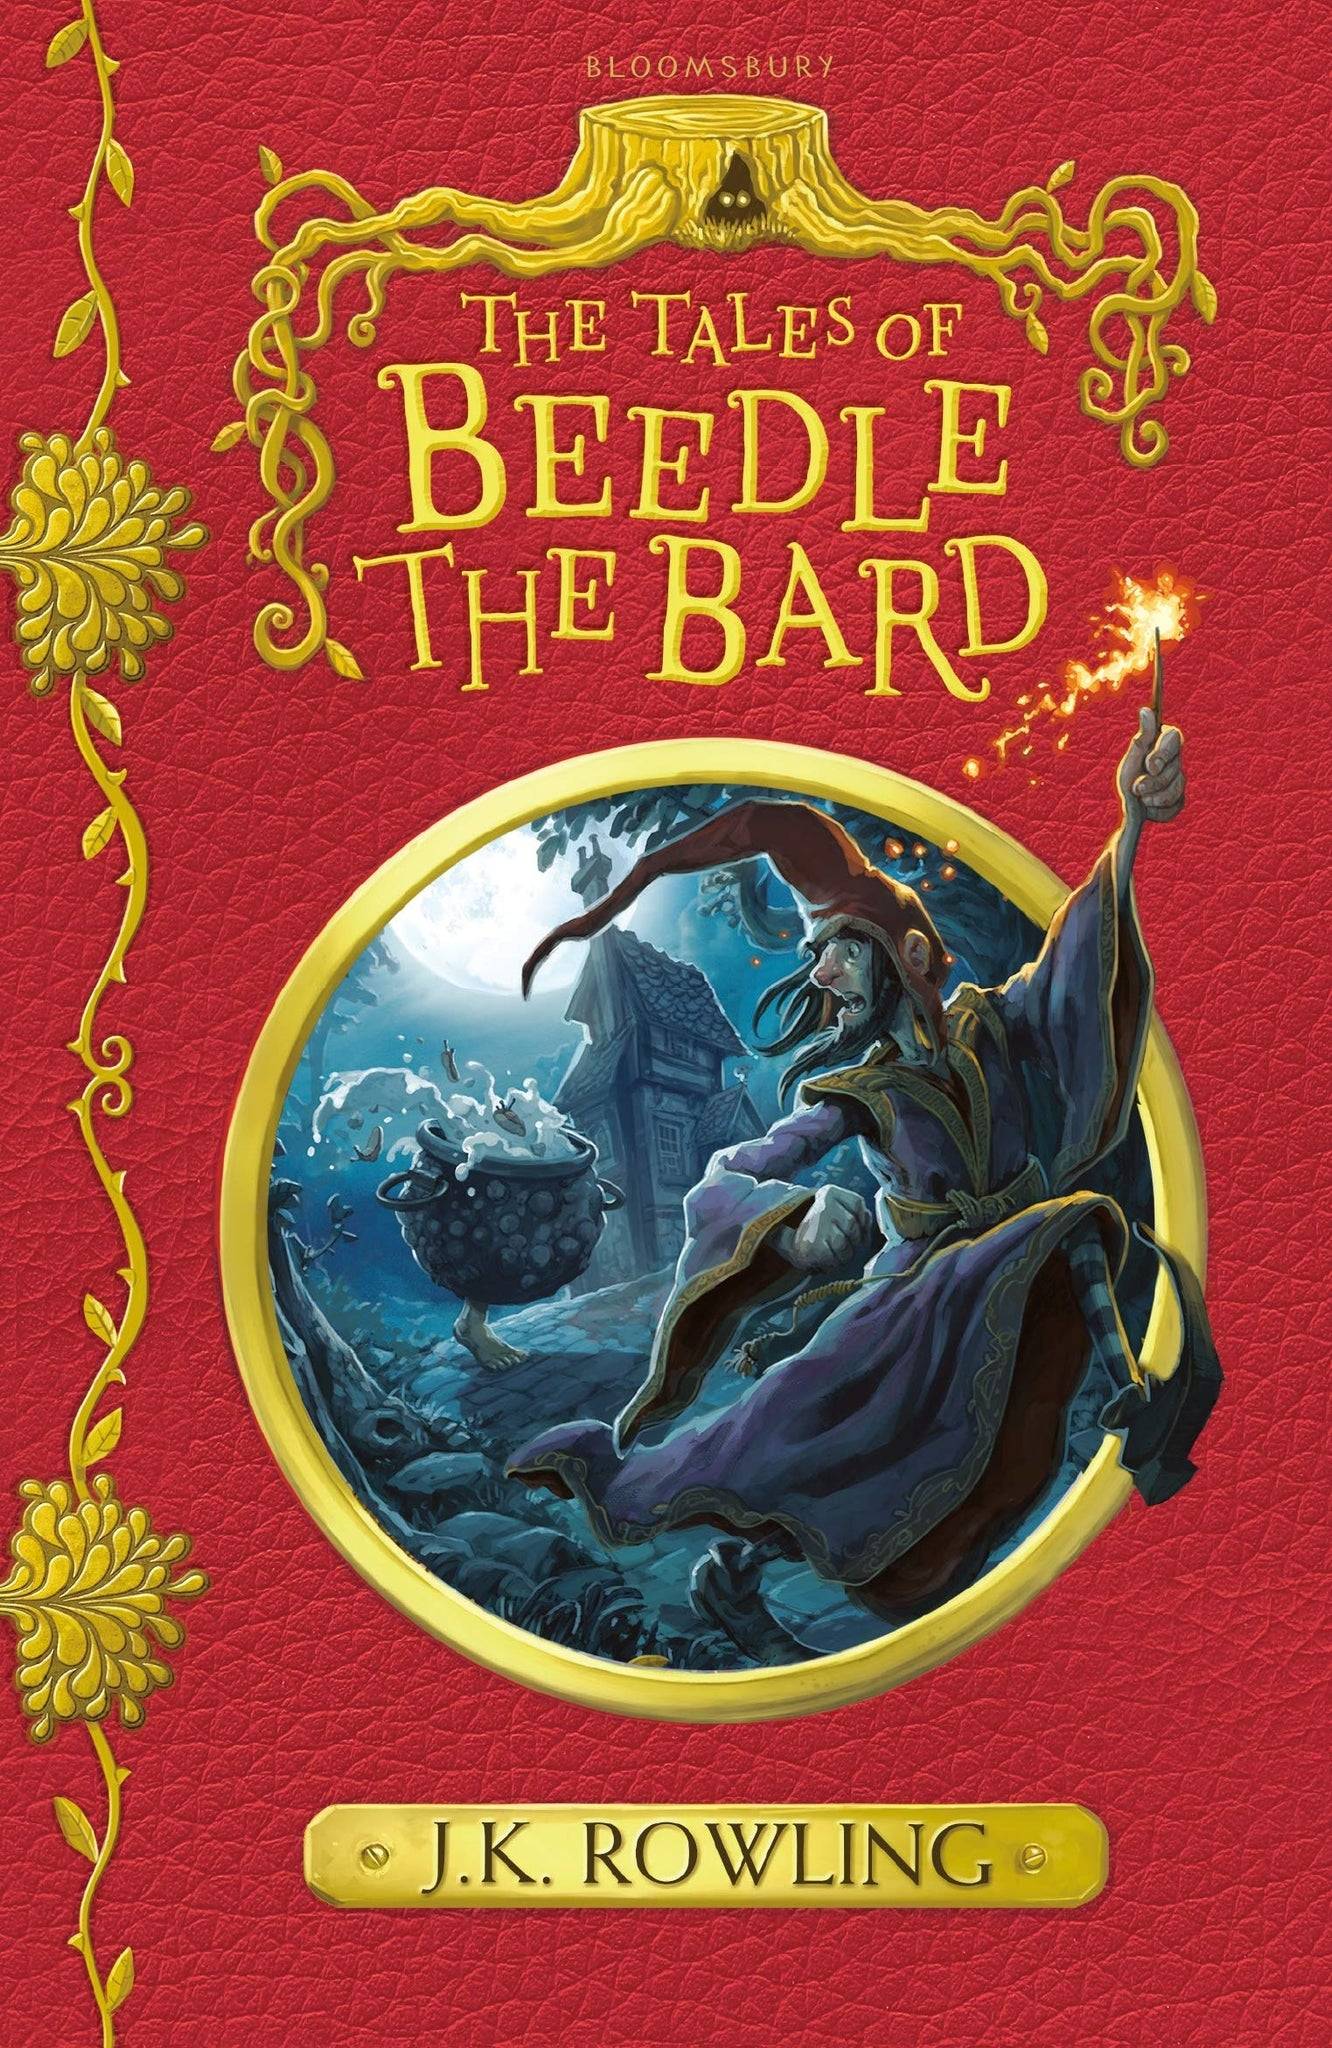 IMG : Hogwarts Library- The Tales of Beedle the Bard